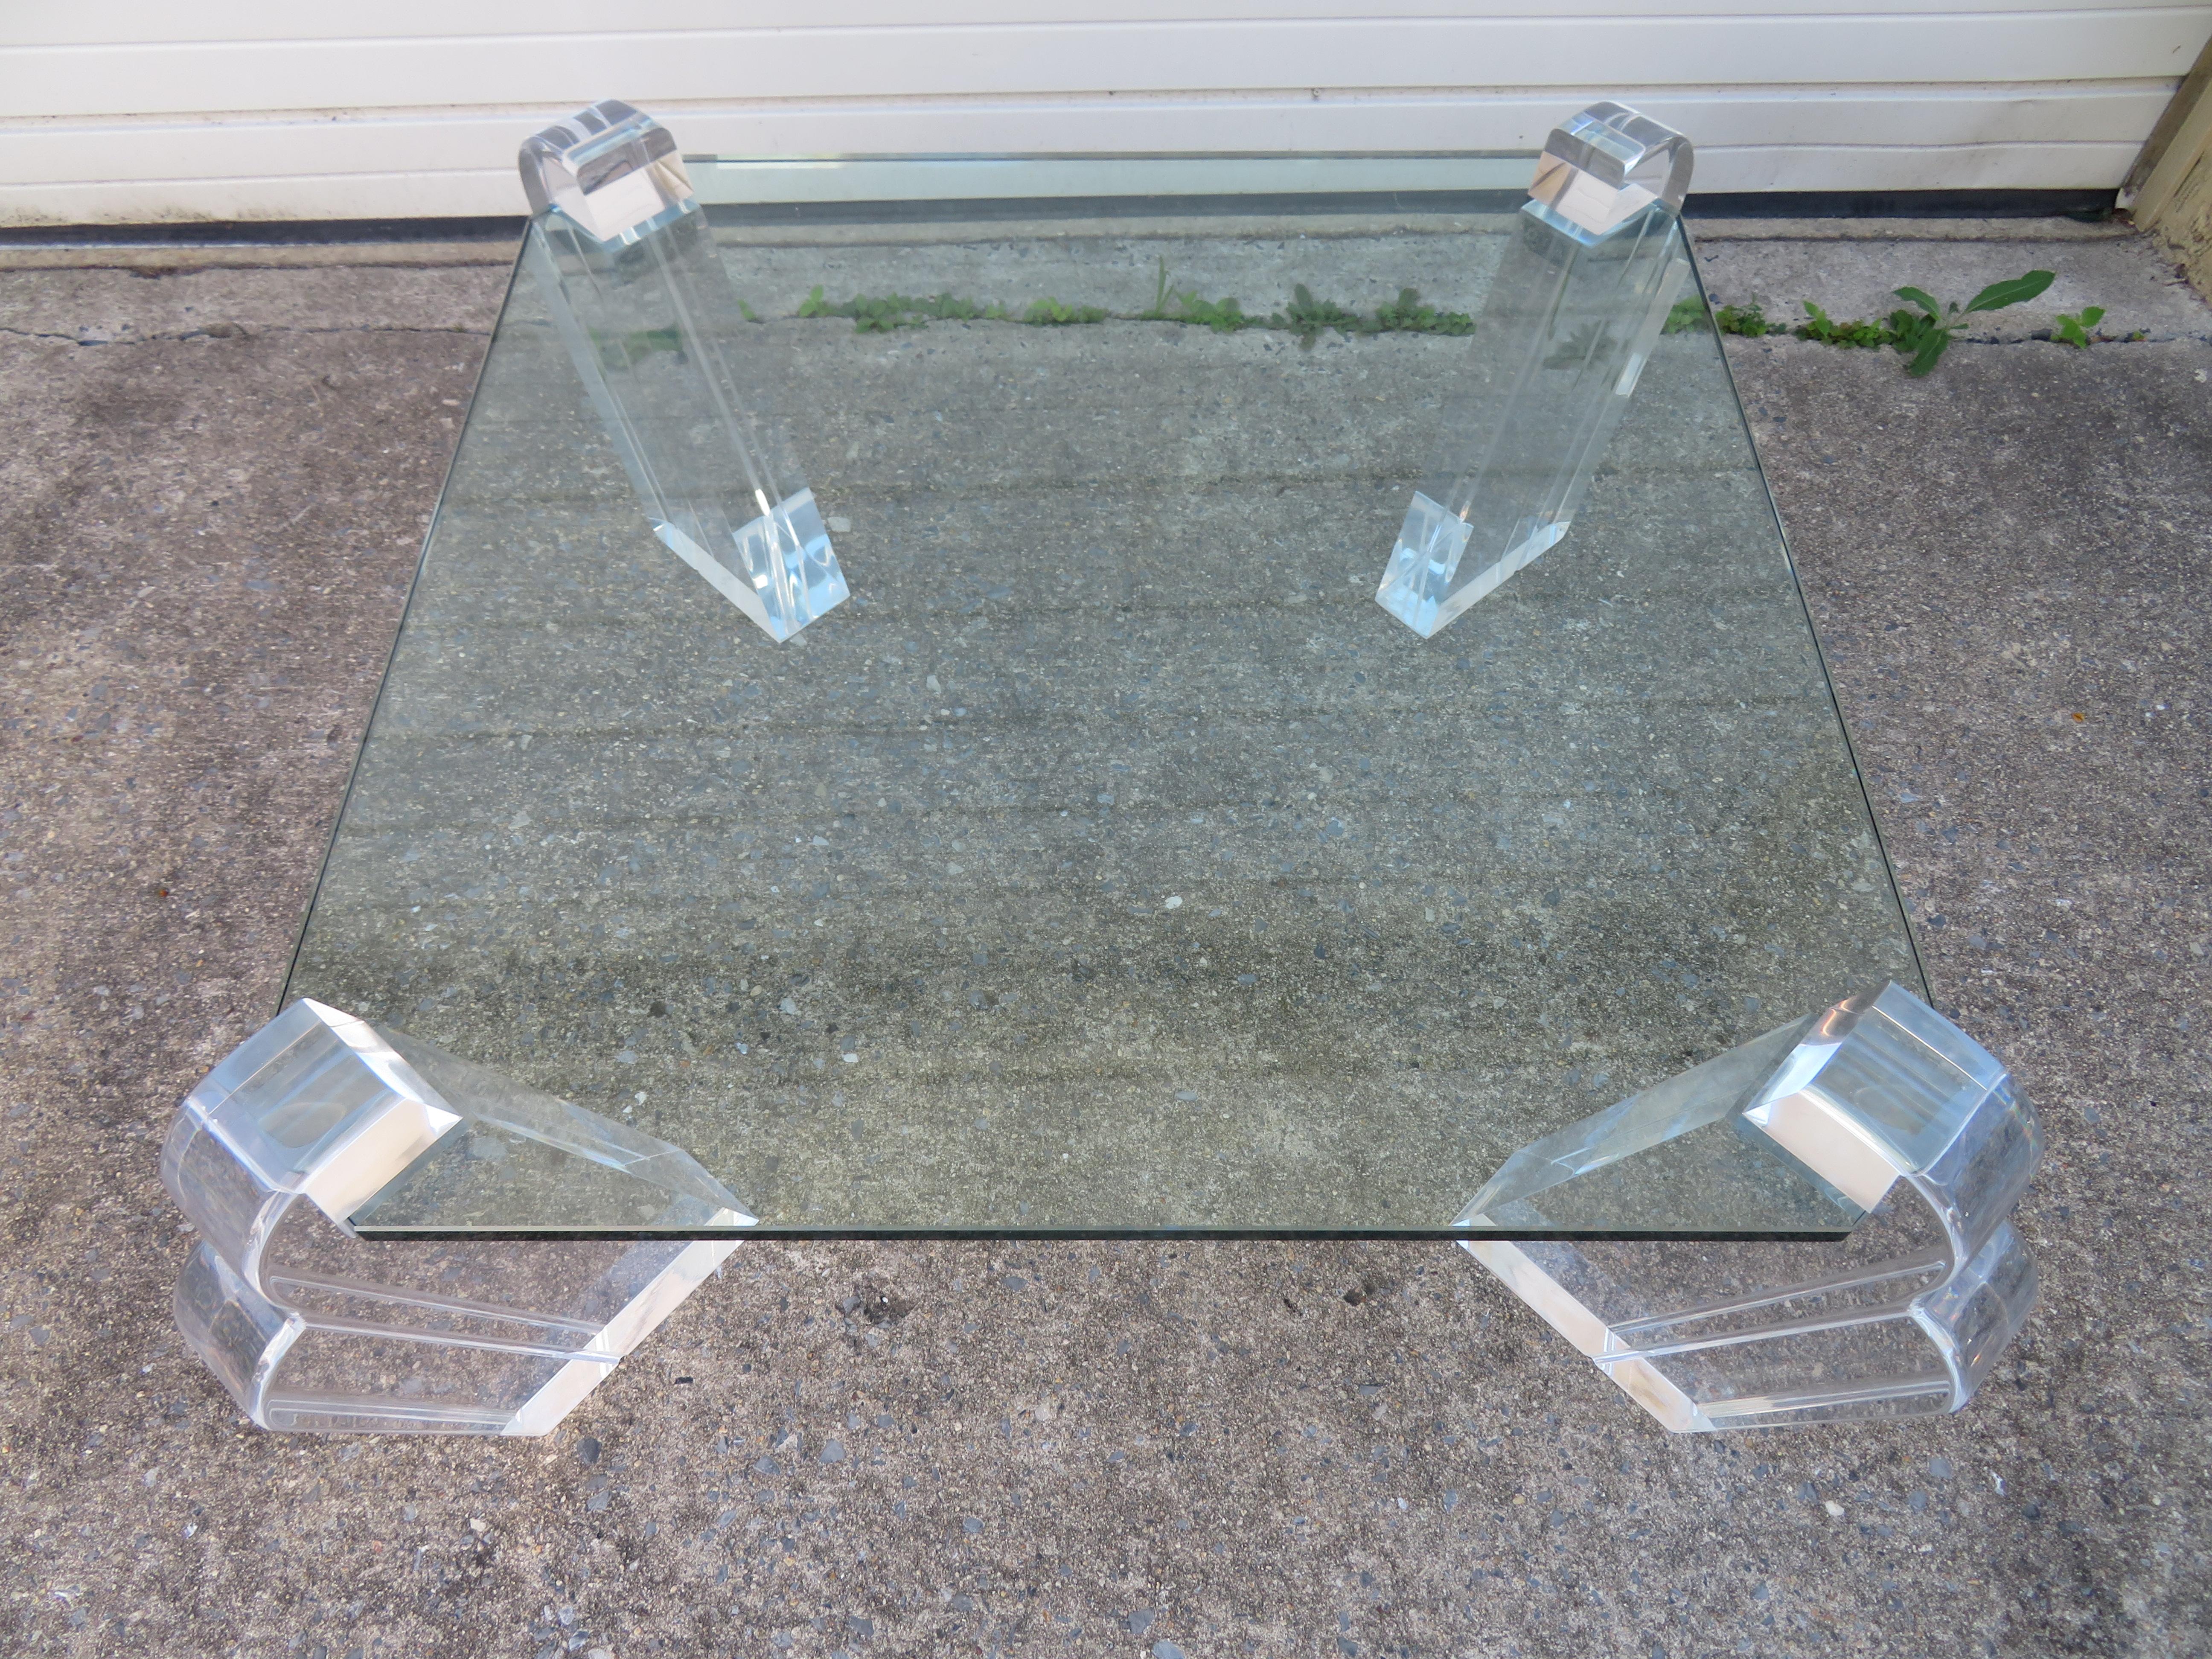 Gorgeous Karl Springer style Lucite pillar coffee table. We love the double arched chunky Lucite pillars that lean slightly backward-really cool. One pillar is slightly thinner than the others-three pillars are 3.5